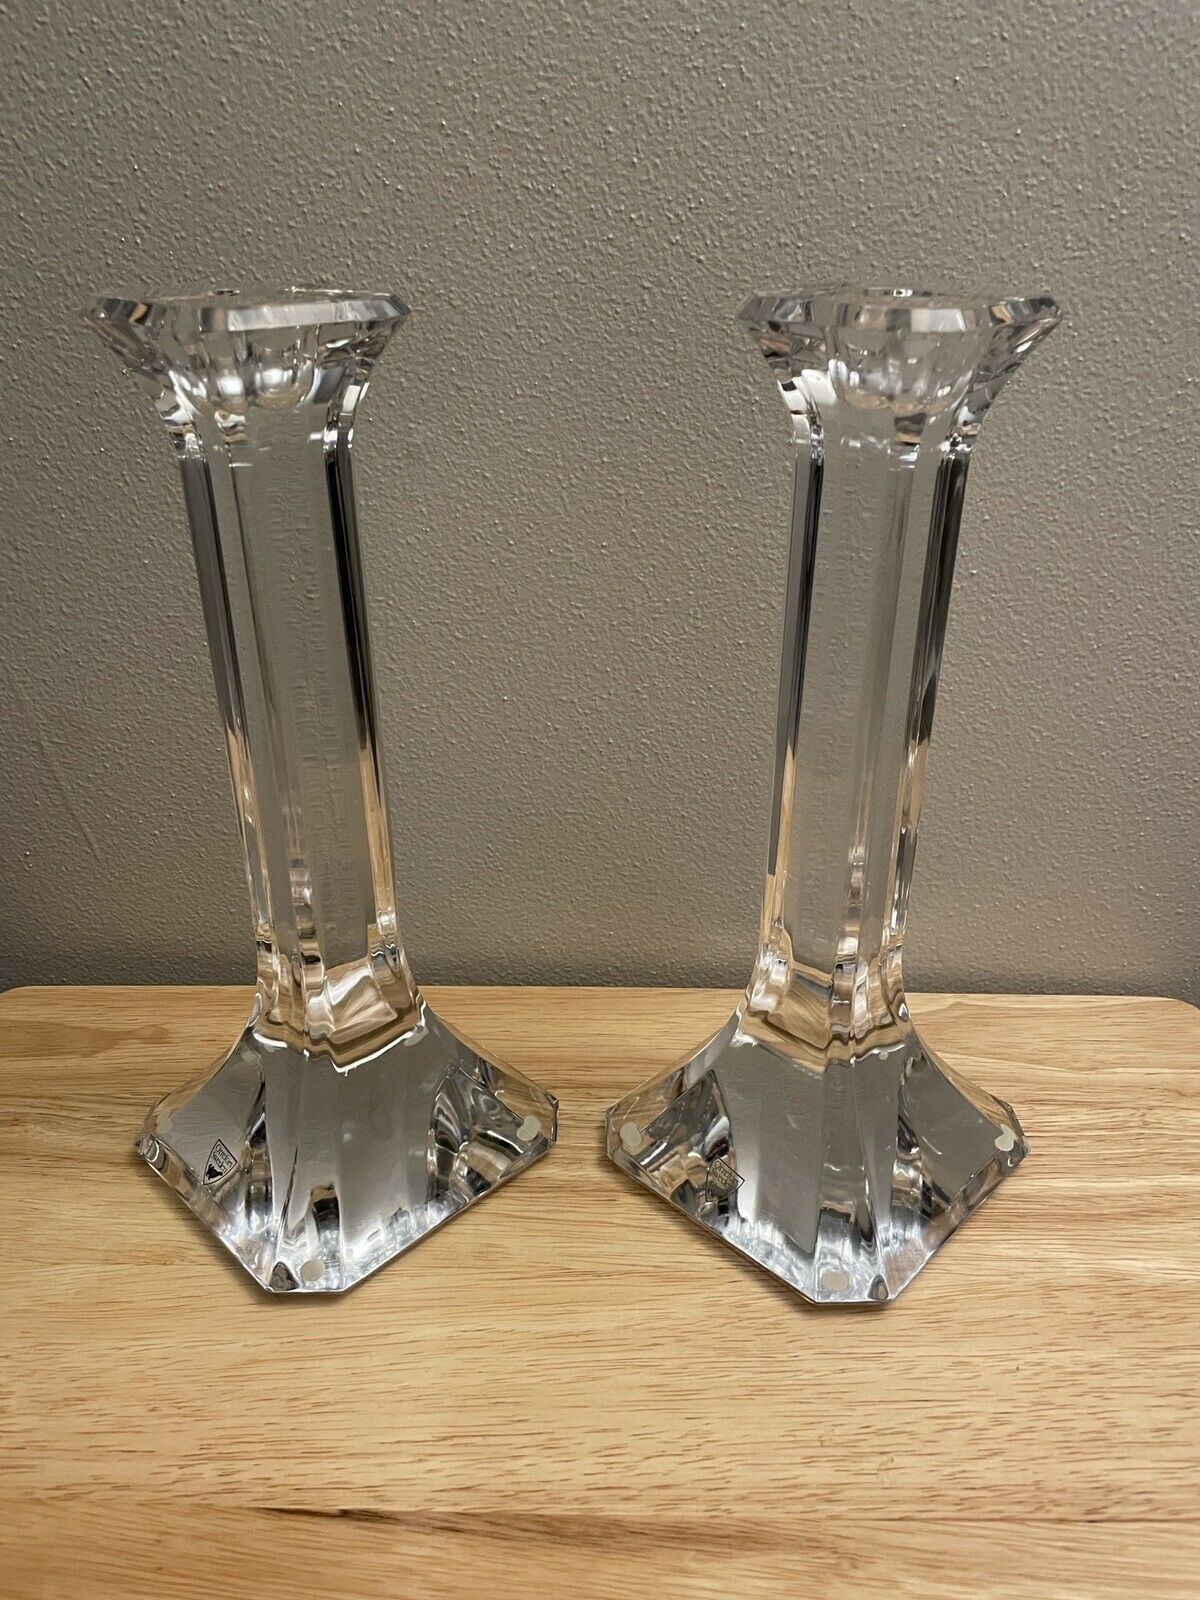 Orrefors Regina Set Of 2 Candlesticks - 10 7/8 Inches Tall. Full Lead Crystal.